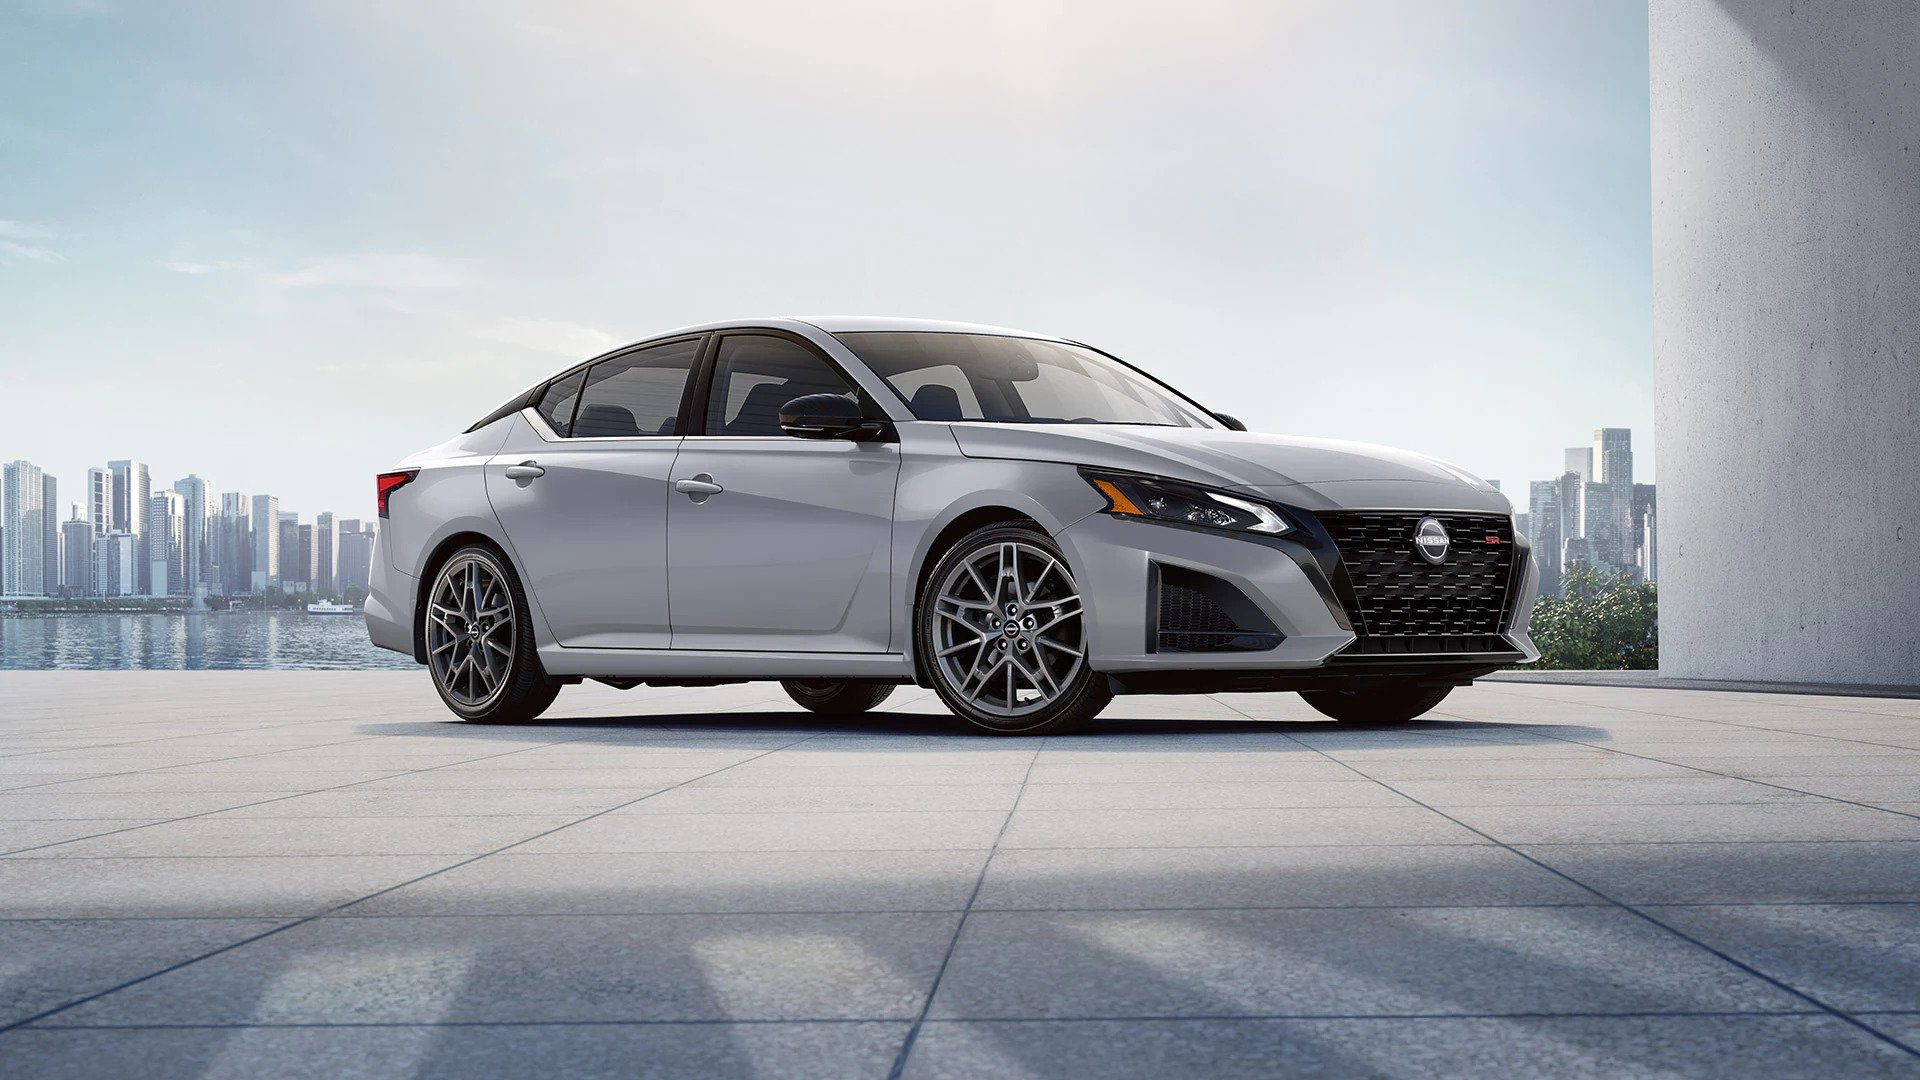 Conyers Nissan has a complete inventory of new and used cars for sale, including the 2022 Nissan Altima, 2019 Nissan Altima, 2015 Nissan Altima, 2021 Nissan Altima, 2013 Nissan Altima, and the latest Nissan Altima models.